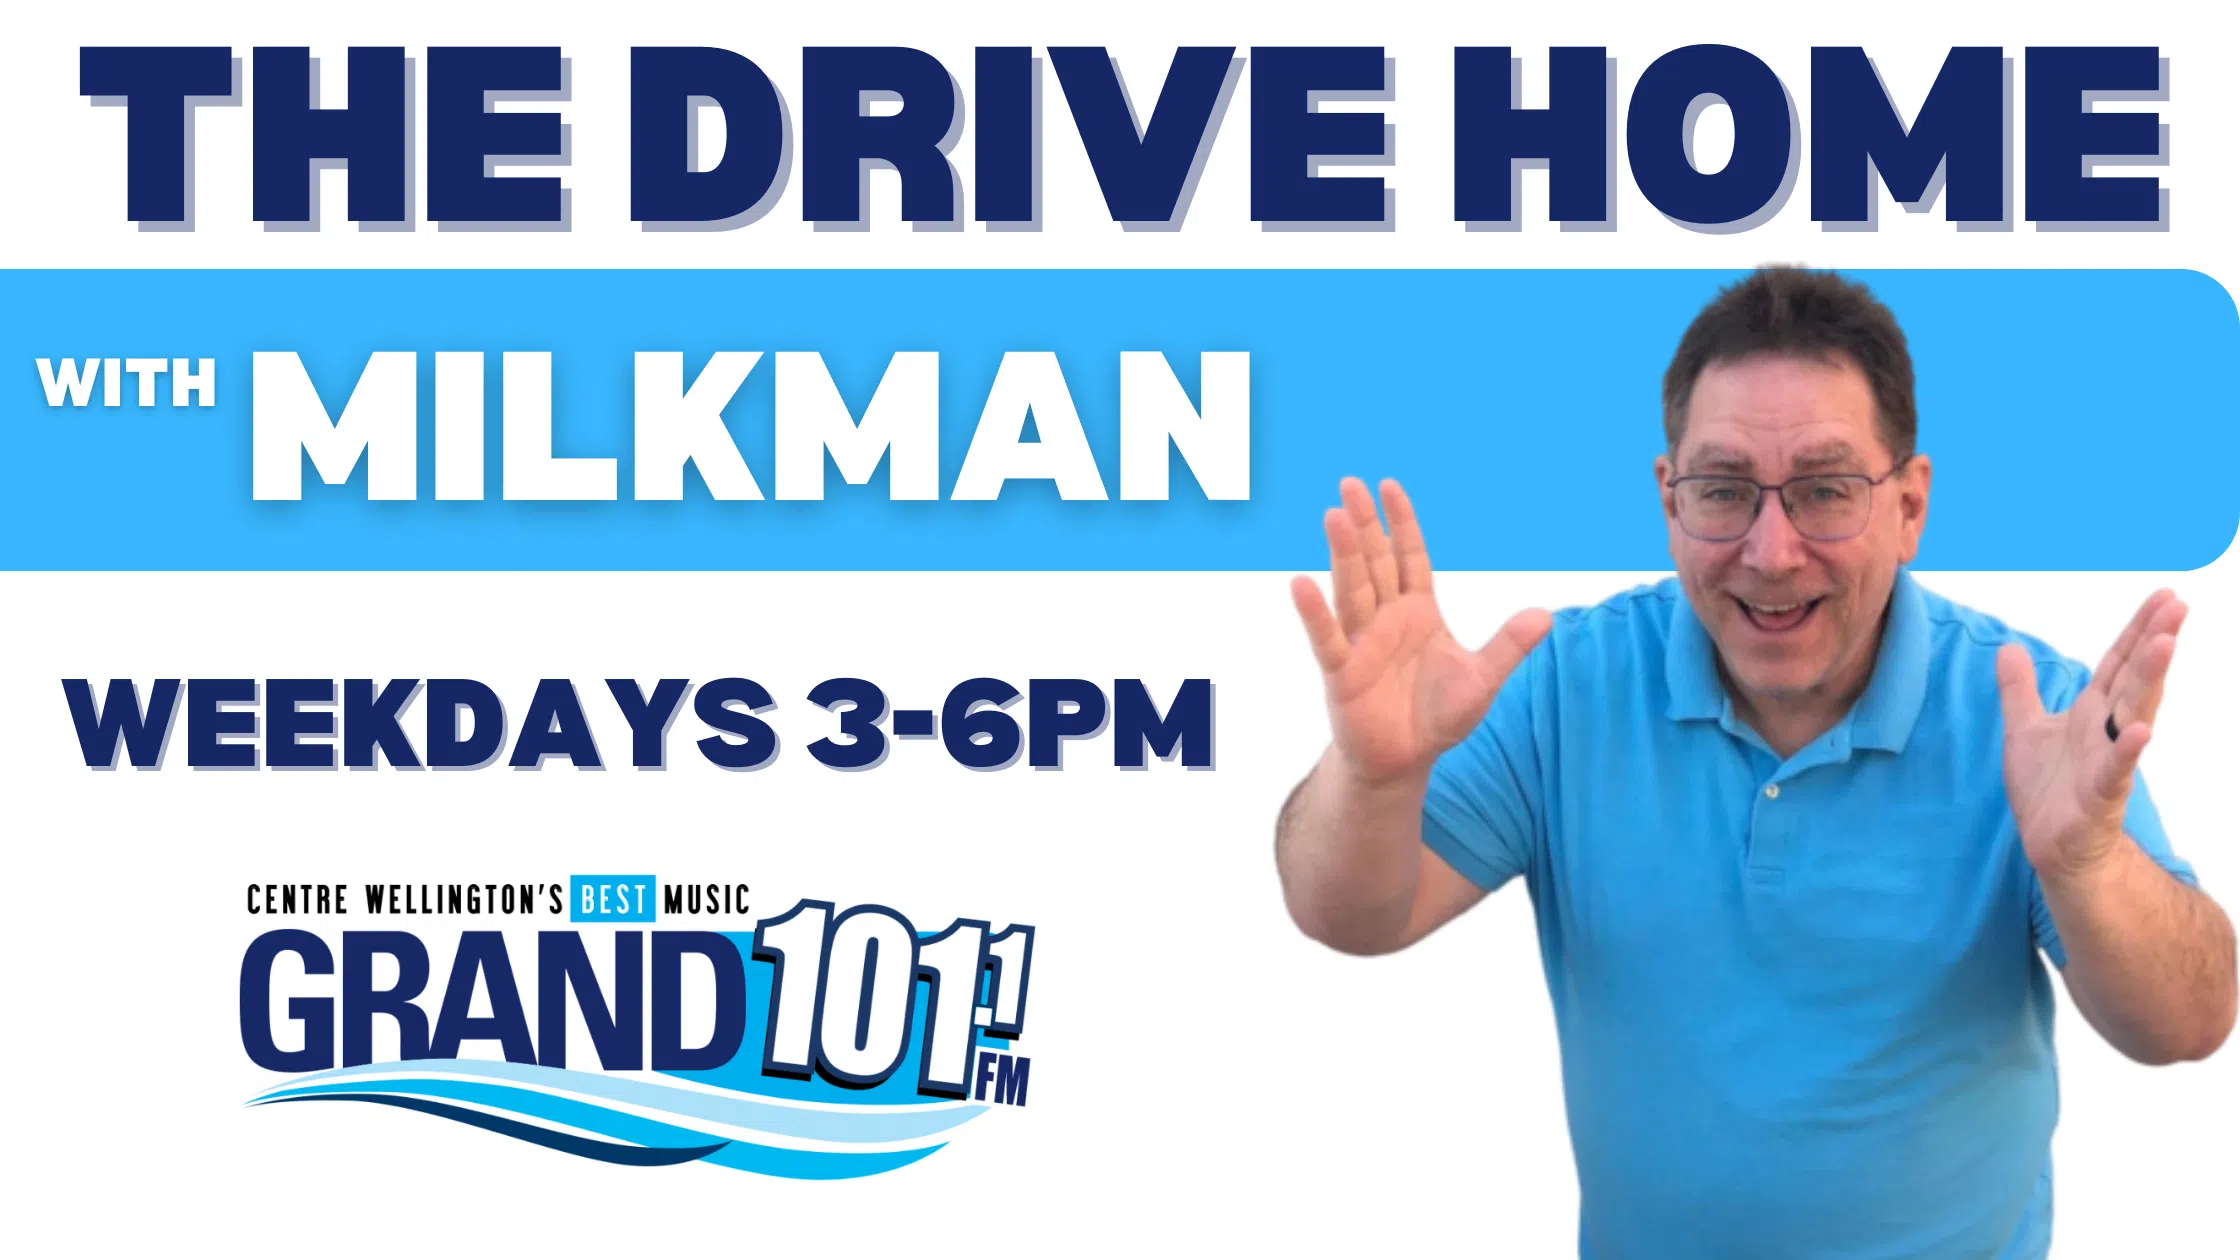 Feature: https://thegrand101.com/the-drive-home-with-milkman/